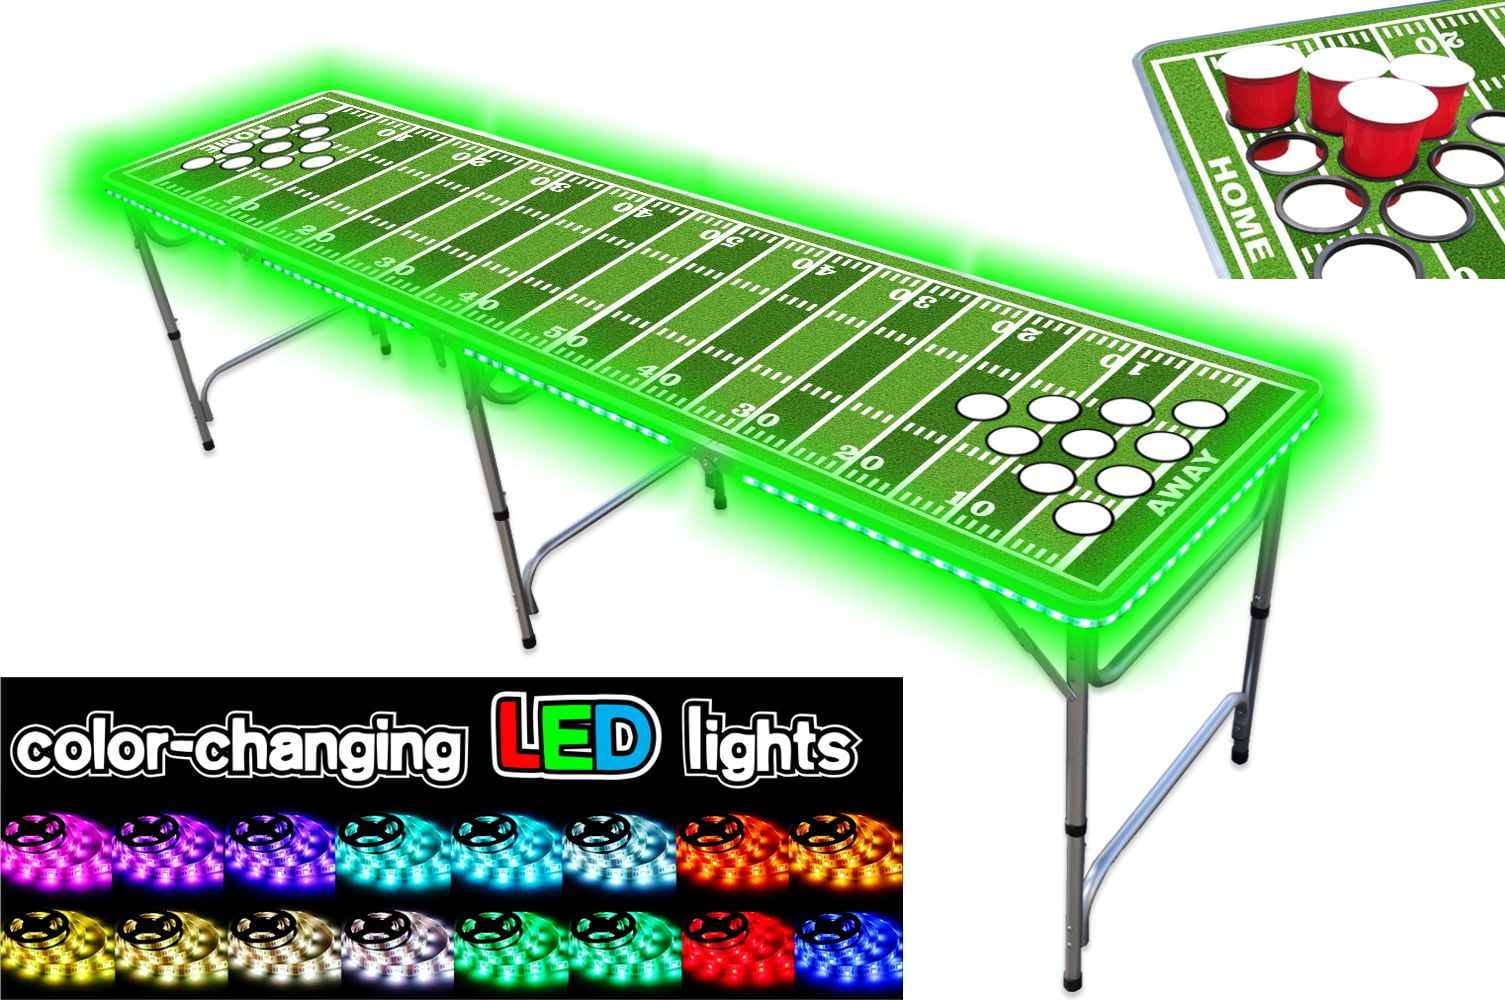 Details about   ❥8-Foot Beer Pong Table LED Lights Outdoor Picnic Beer Table w/Optional Cup Hole 